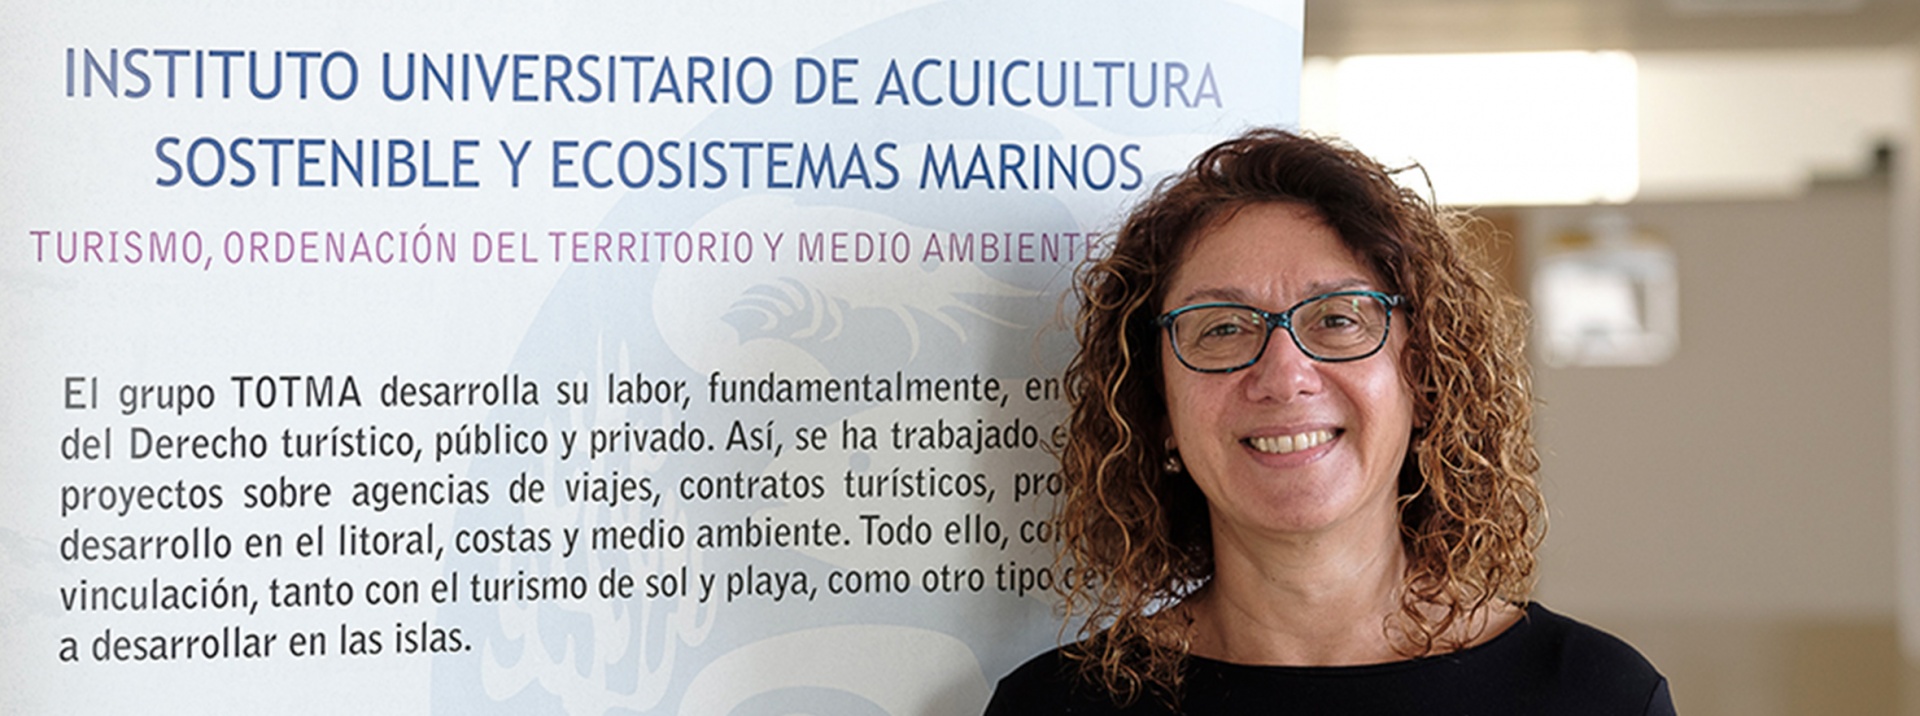 ULPGC professor Inmaculada González analyses in a book the regulatory challenges posed by the collaborative economy in the field of accommodation